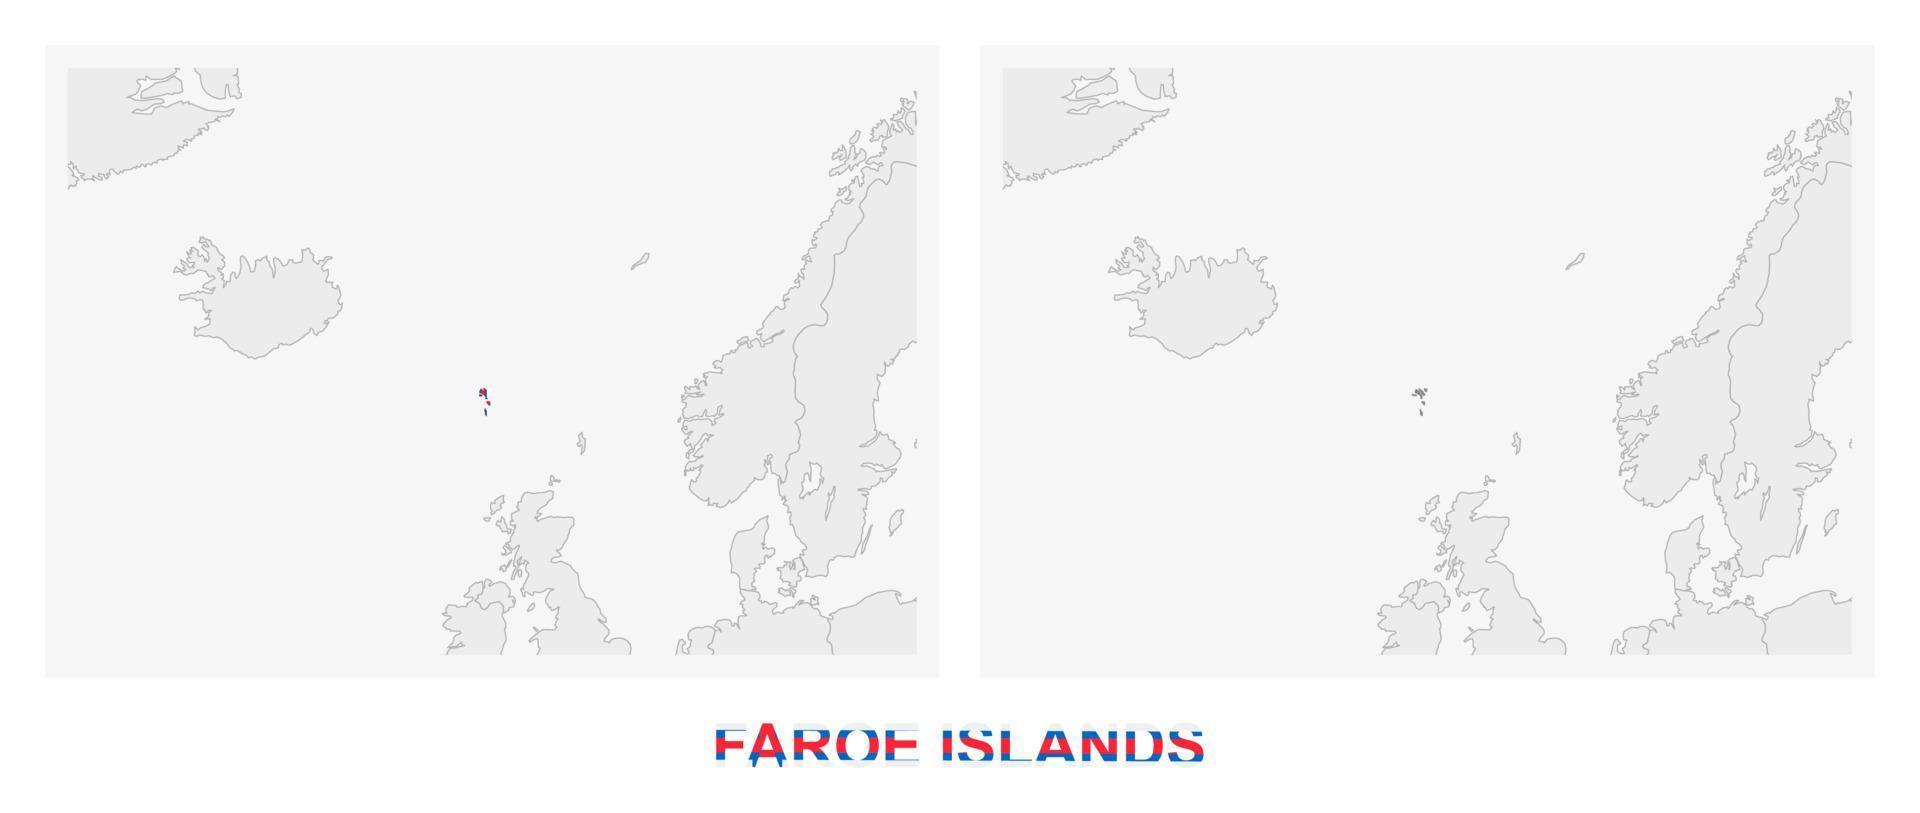 Two versions of the map of Faroe Islands, with the flag of Faroe Islands and highlighted in dark grey. vector